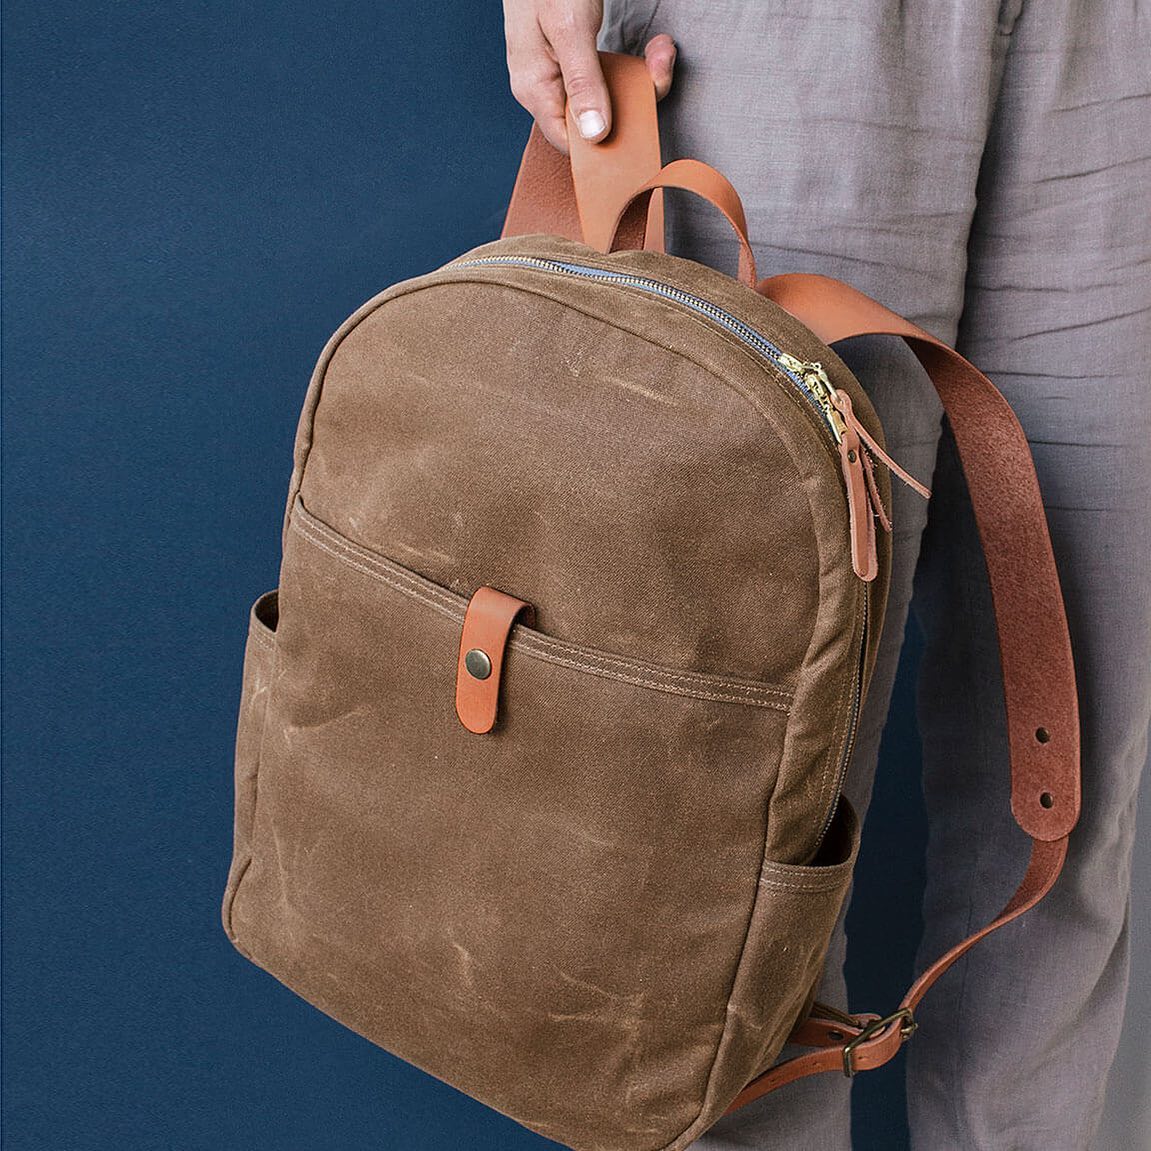 Barton waxed canvas and vegetable tanned leather backpack in brown color